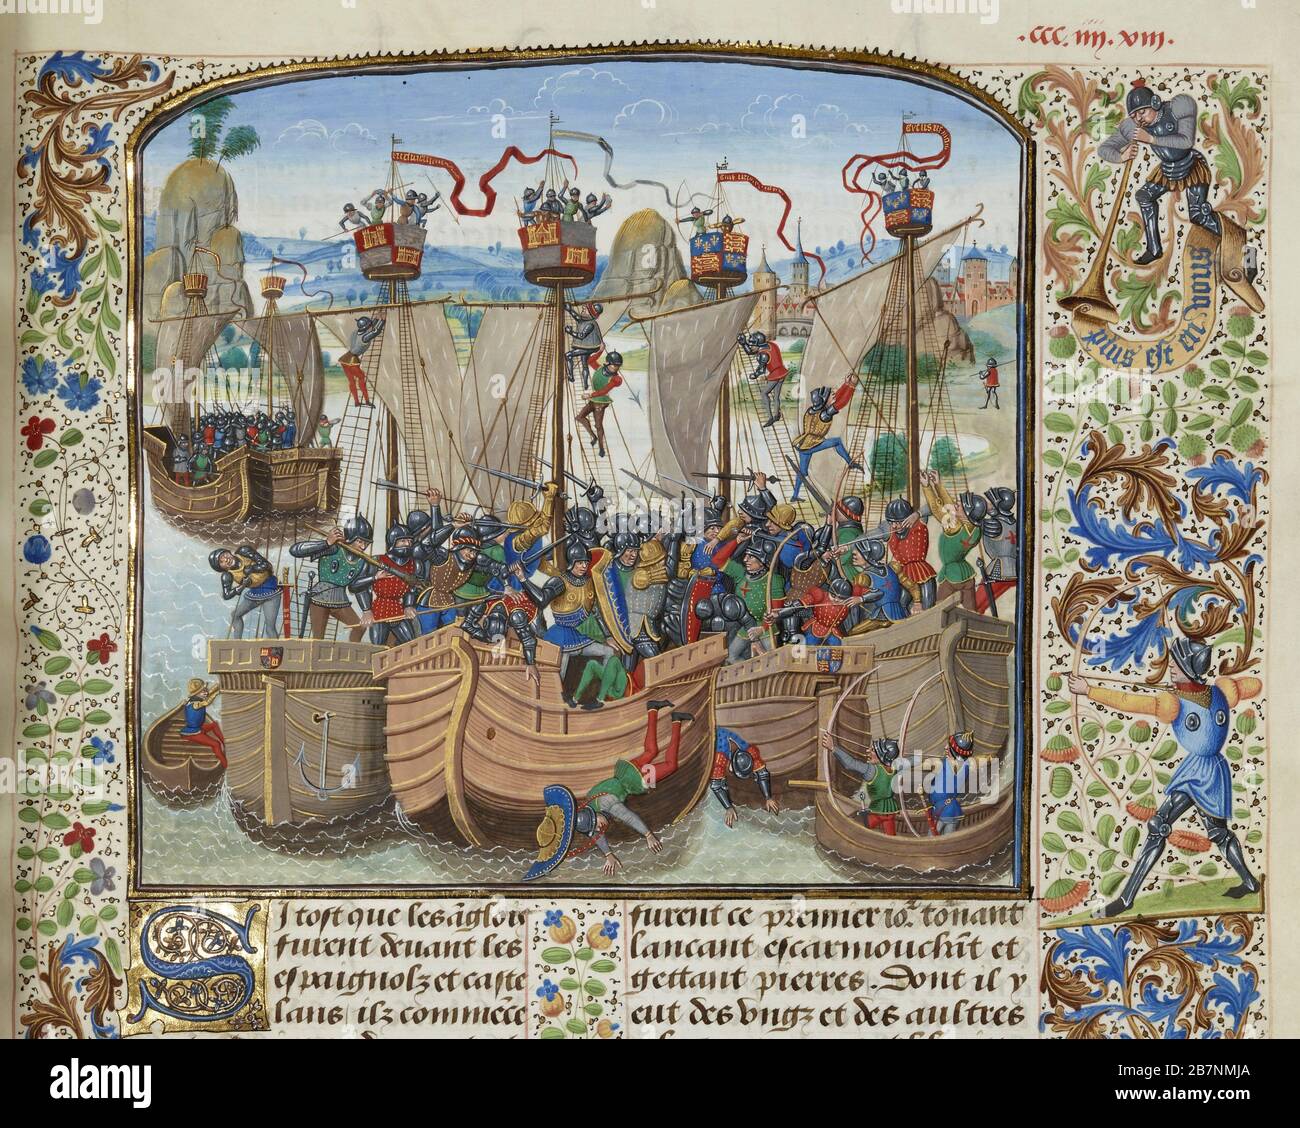 The Battle of La Rochelle, 1372 (Miniature from the Grandes Chroniques de  France by Jean Froissart), ca 1470-1475. Found in the Collection of  Biblioth&#xe8;que Nationale de France Stock Photo - Alamy